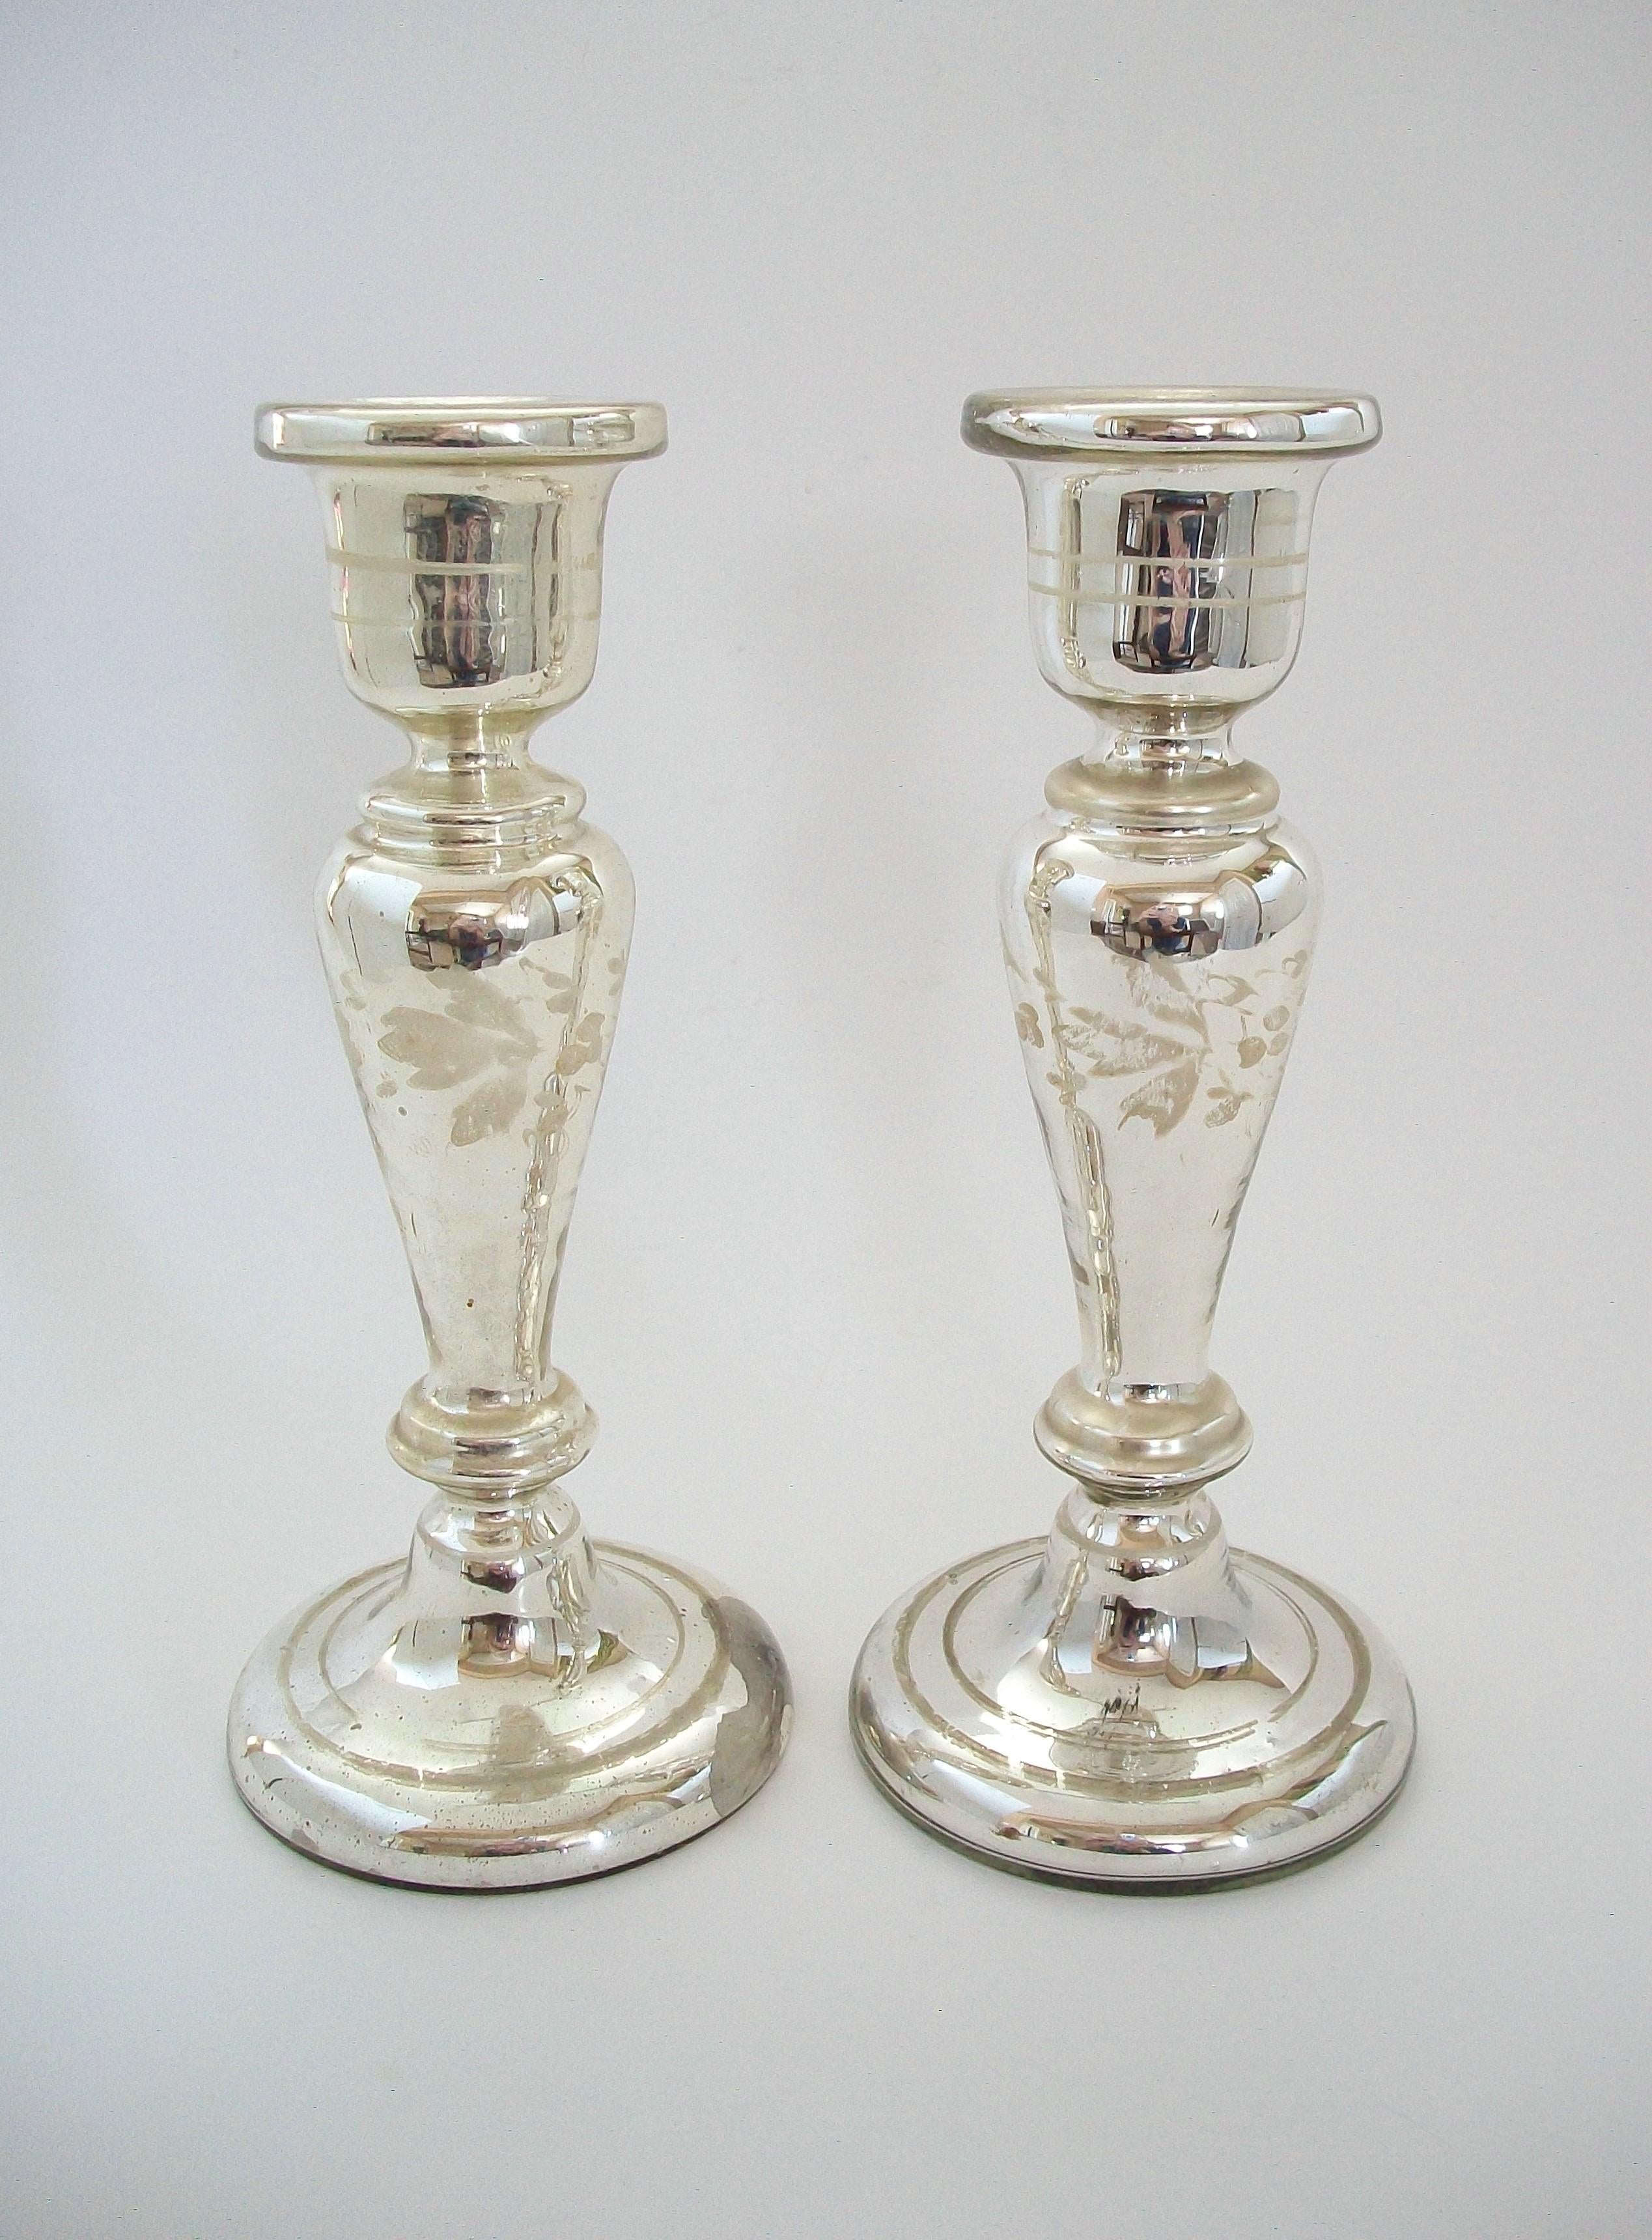 Large antique pair of white painted Mercury glass candlesticks - featuring hand painted bands of leaves and berries to each - double band lines to the sockets and bases - unsigned - France - circa 1880.

Excellent antique condition - paint loss -